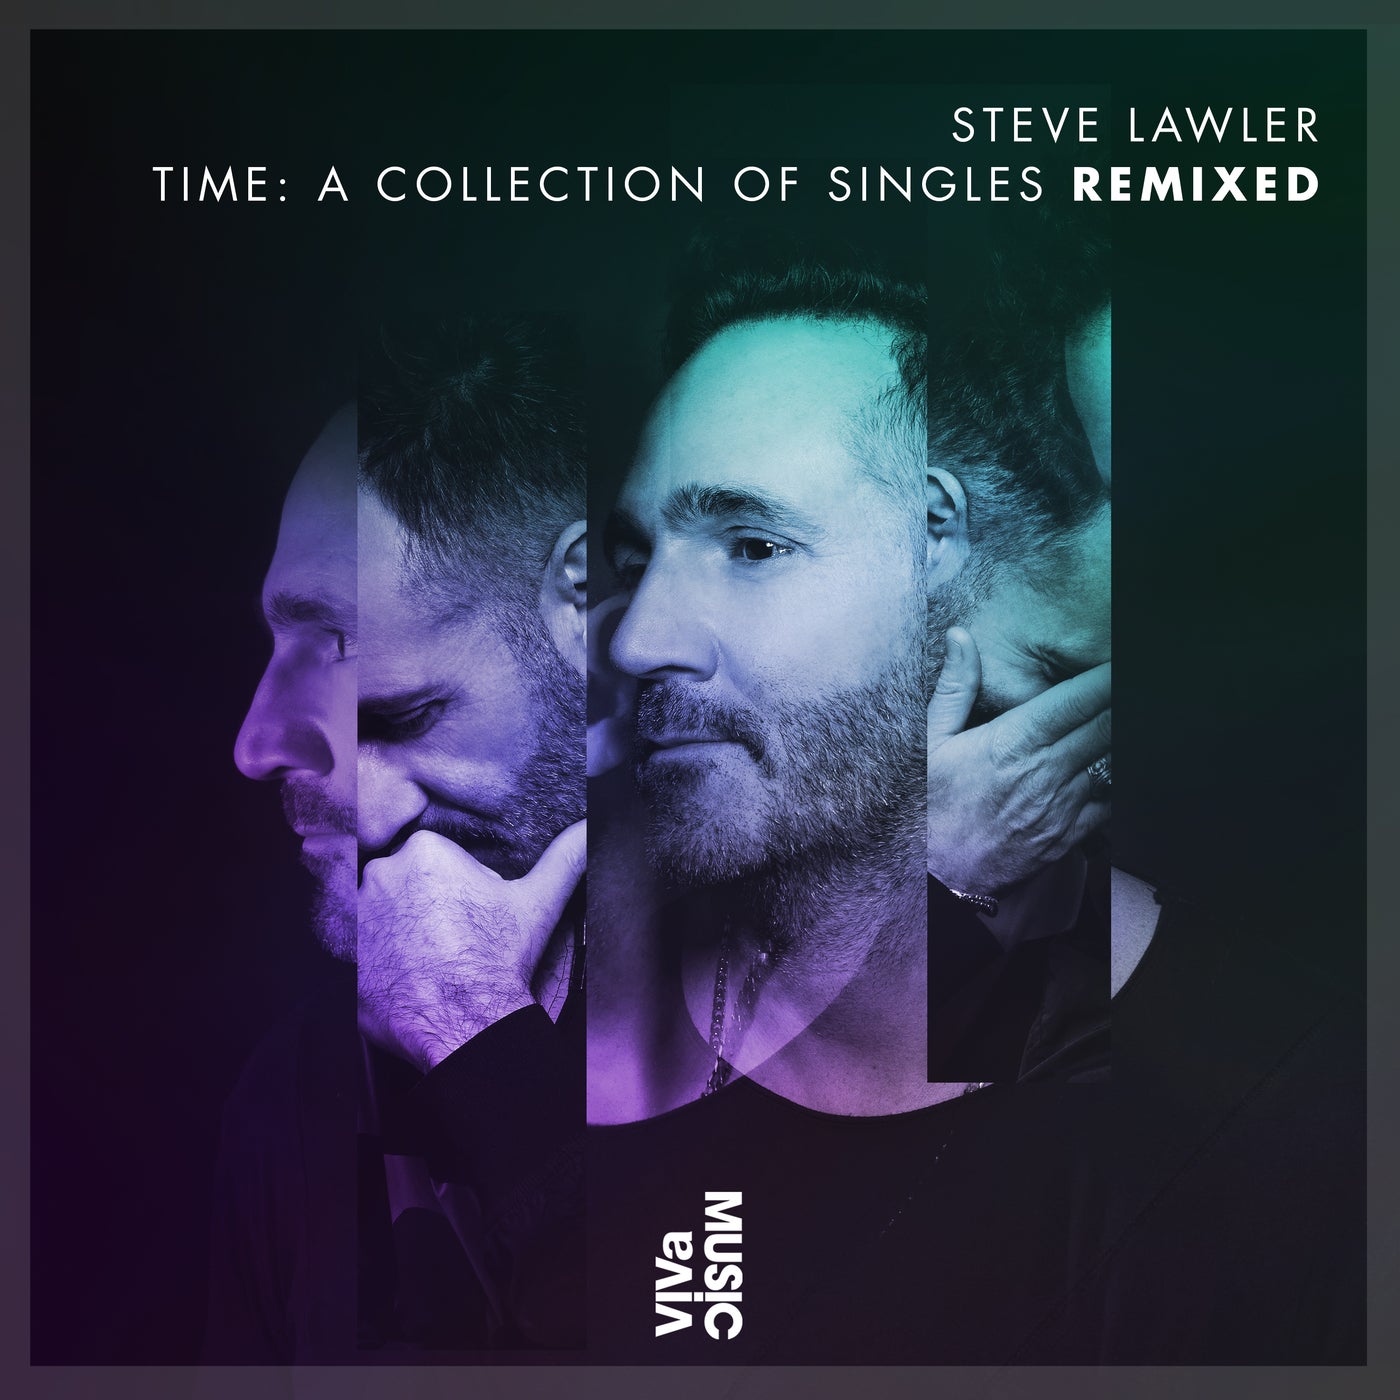 Steve Lawler – Time: A Collection of Singles Remixed